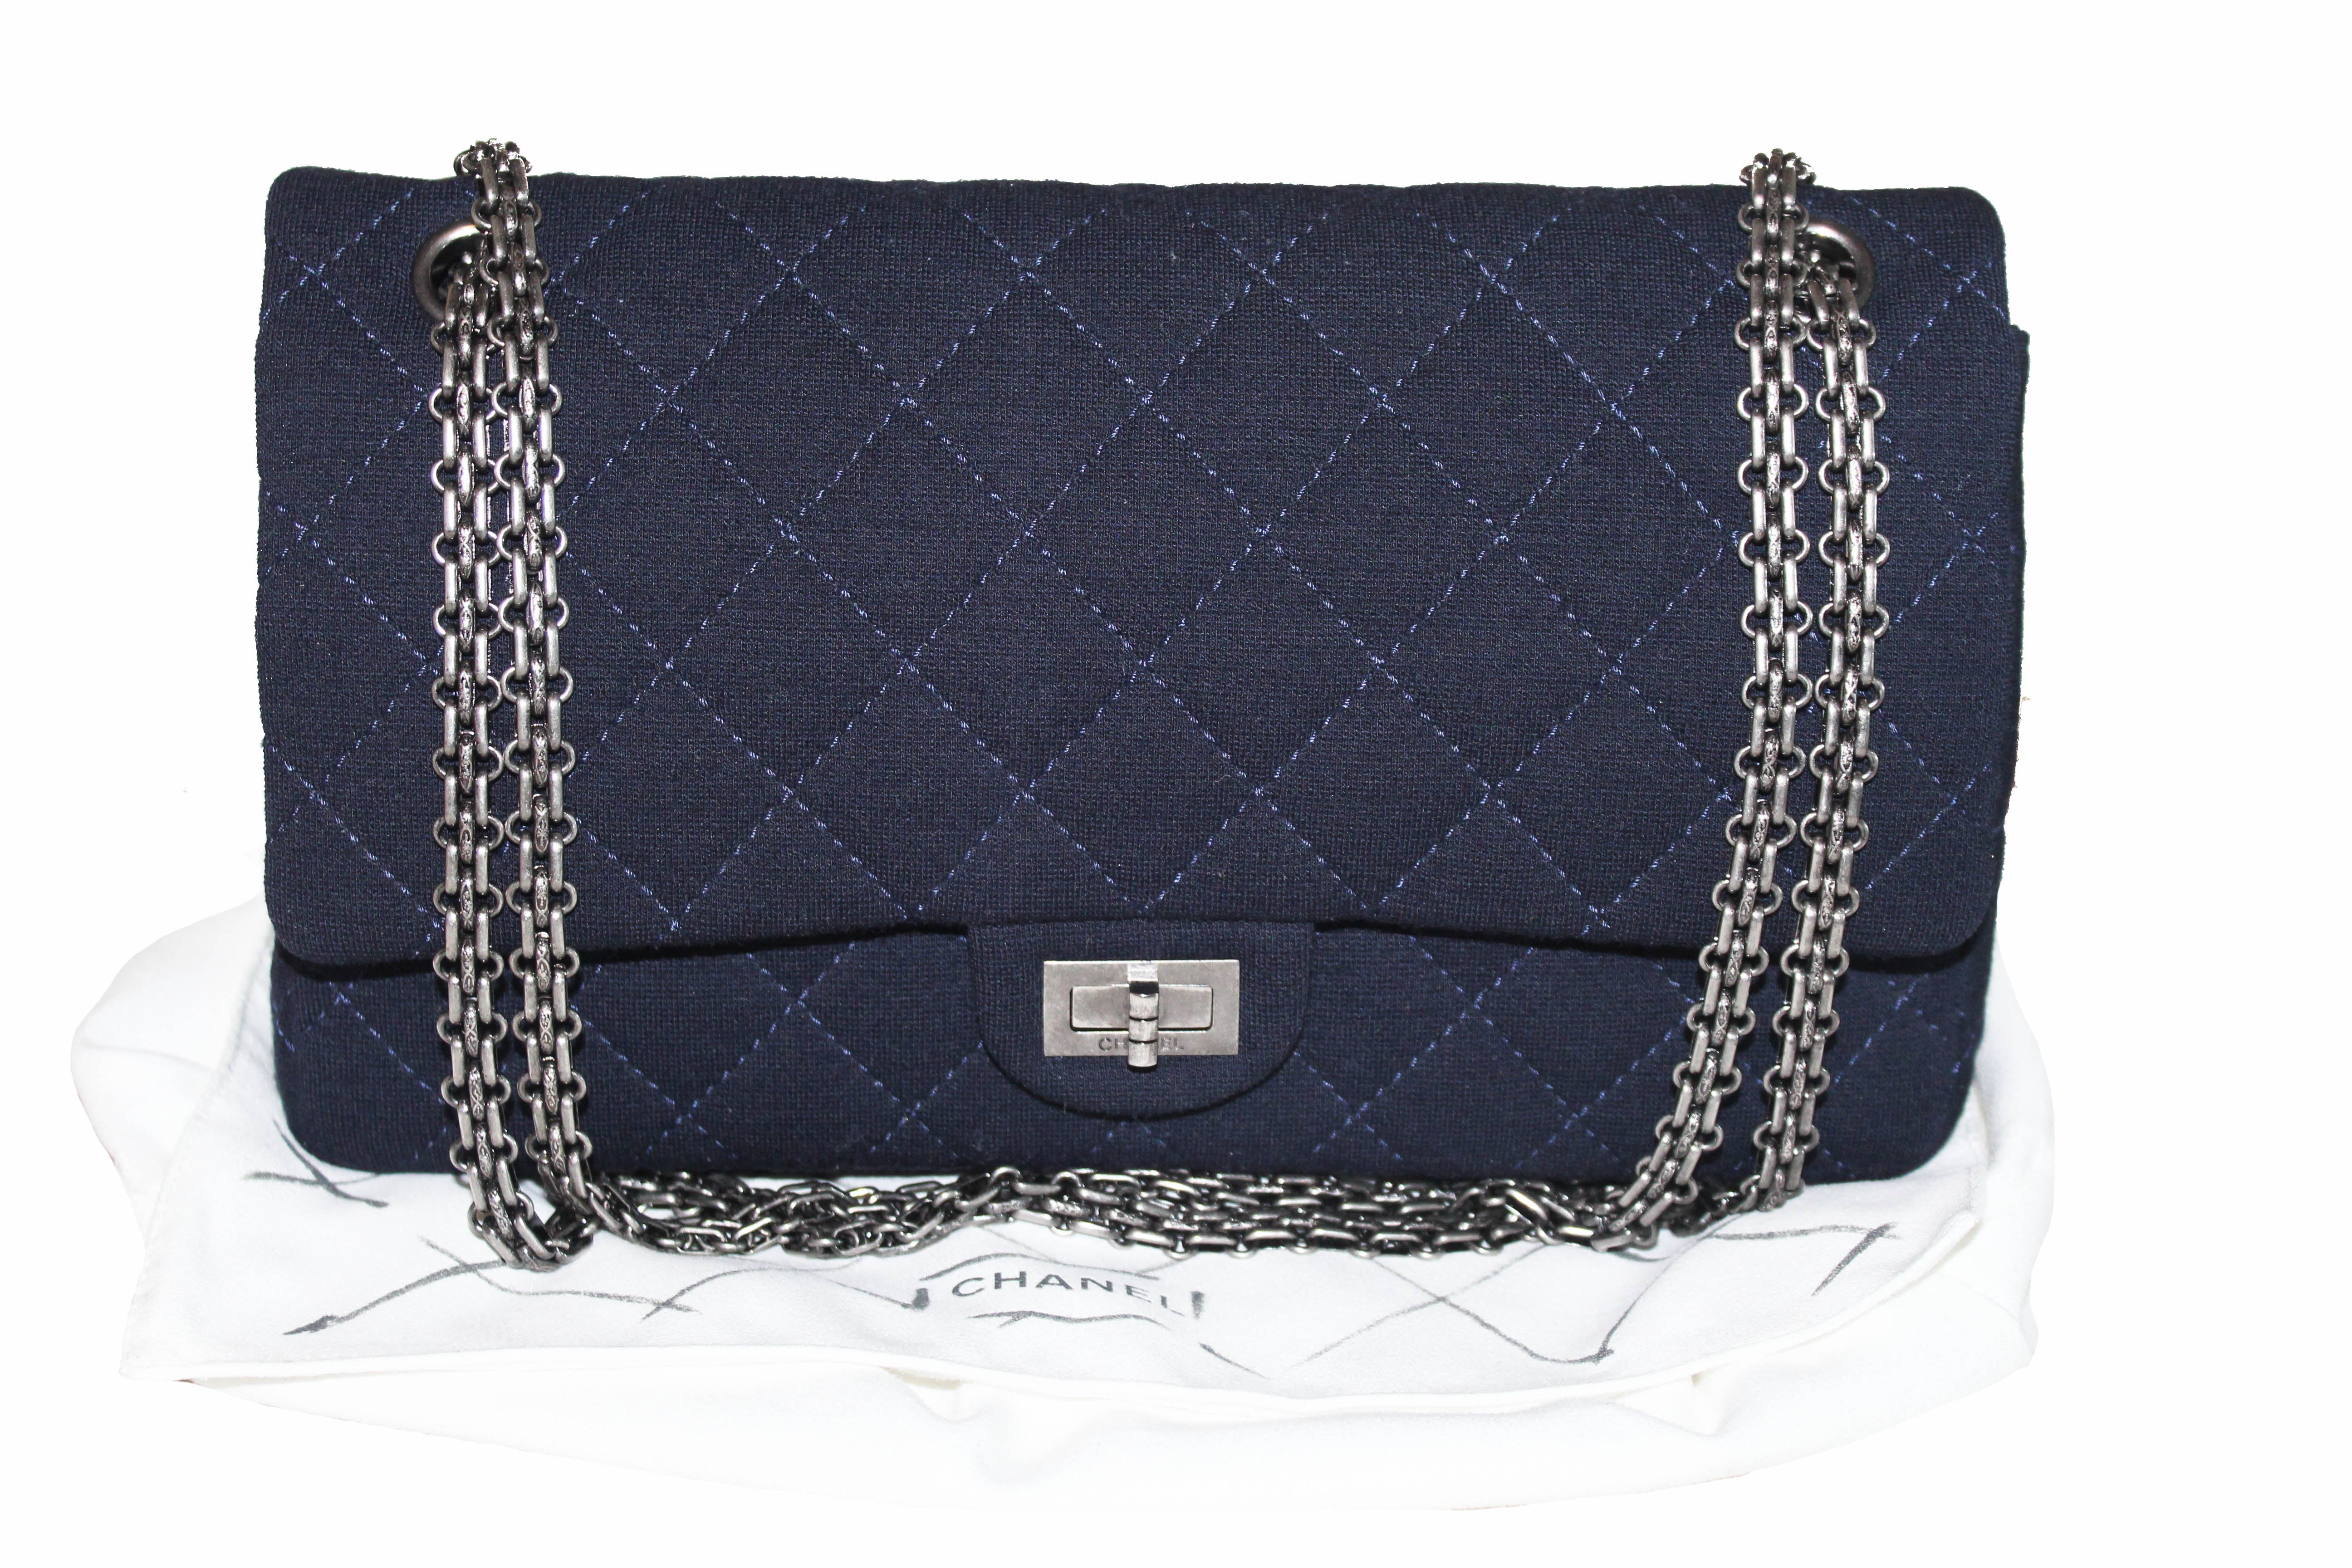 Authentic Chanel Navy Blue Fabric Canvas Jersey Large 2.55 Reissue 226 Shoulder Bag